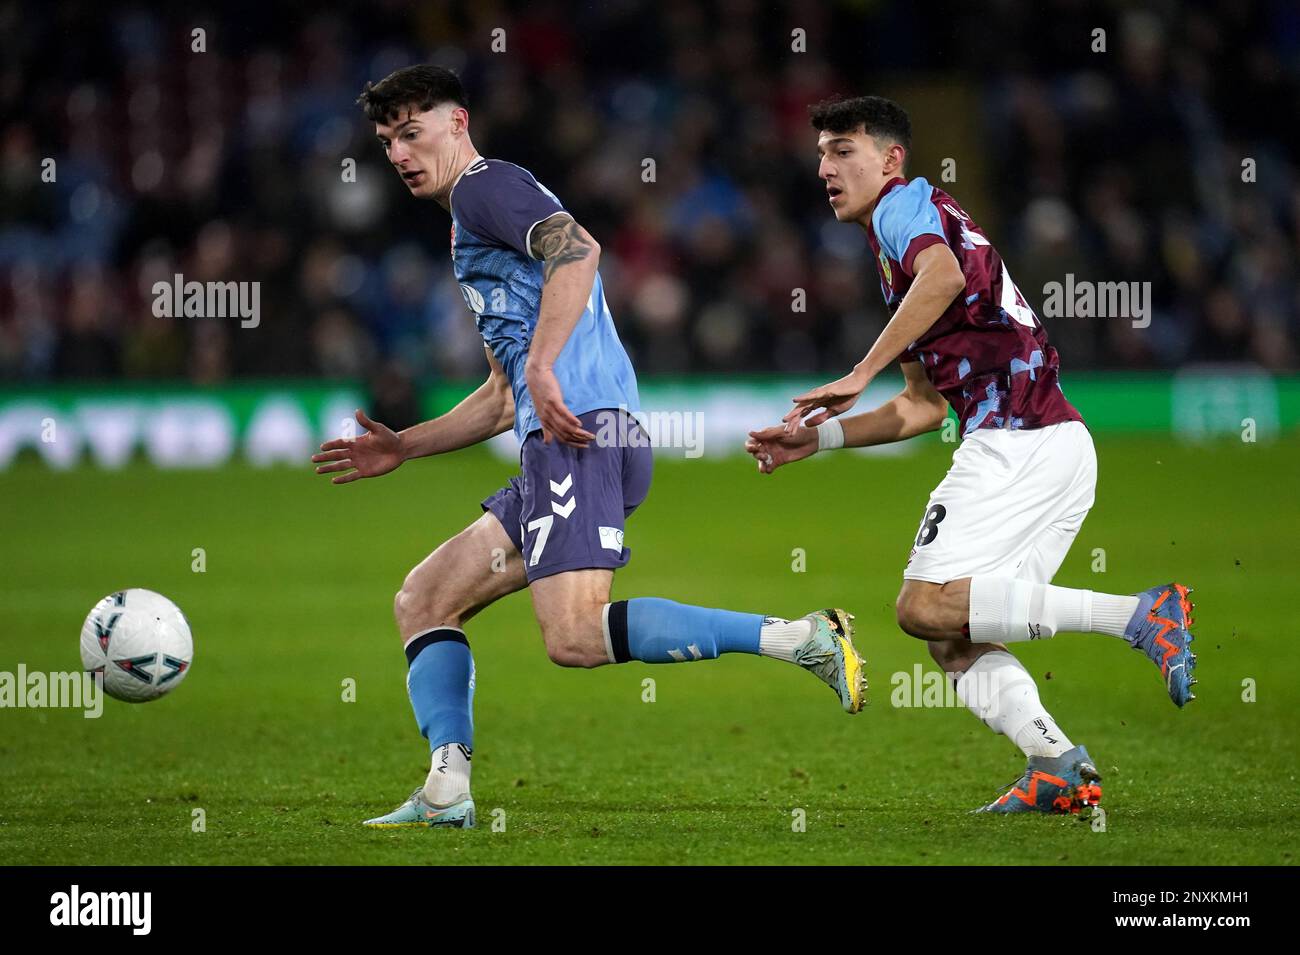 Fleetwood Town's Harvey Macadam (left) and Burnley's Ameen Al-Dakhil in action during the Emirates FA Cup fifth round match at Turf Moor, Burnley. Picture date: Wednesday March 1, 2023. Stock Photo